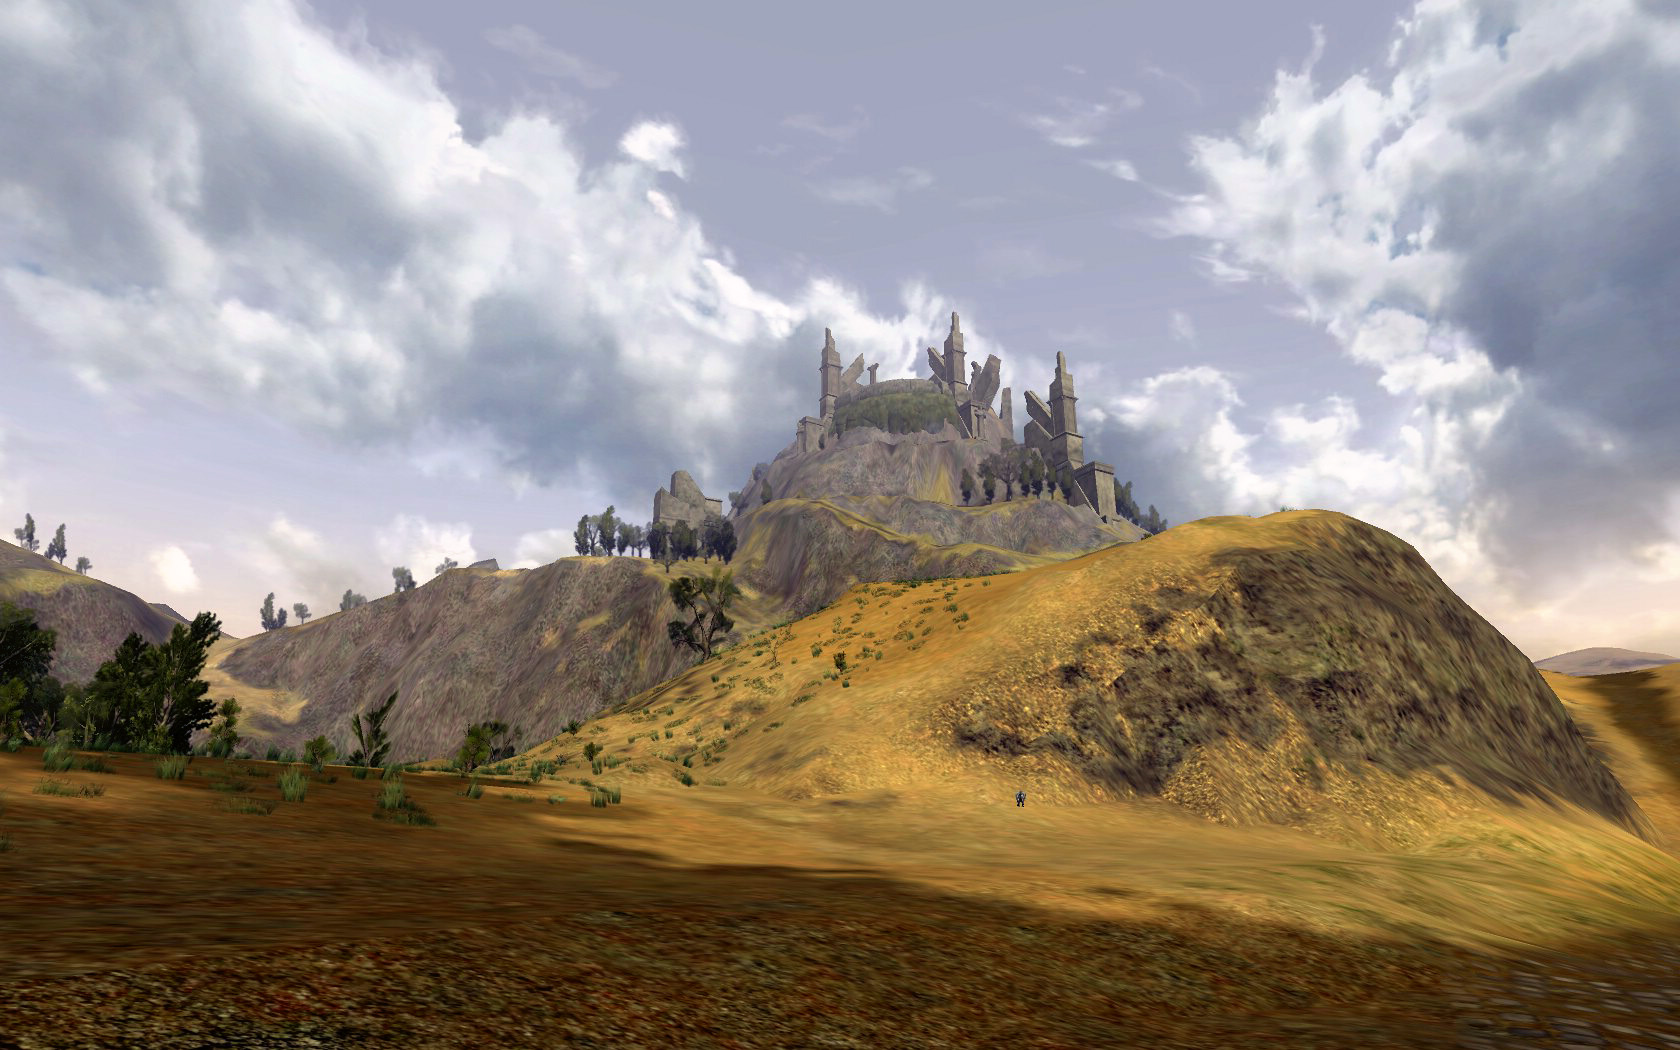 announces fresh stab at turning The Lord of the Rings into an MMO